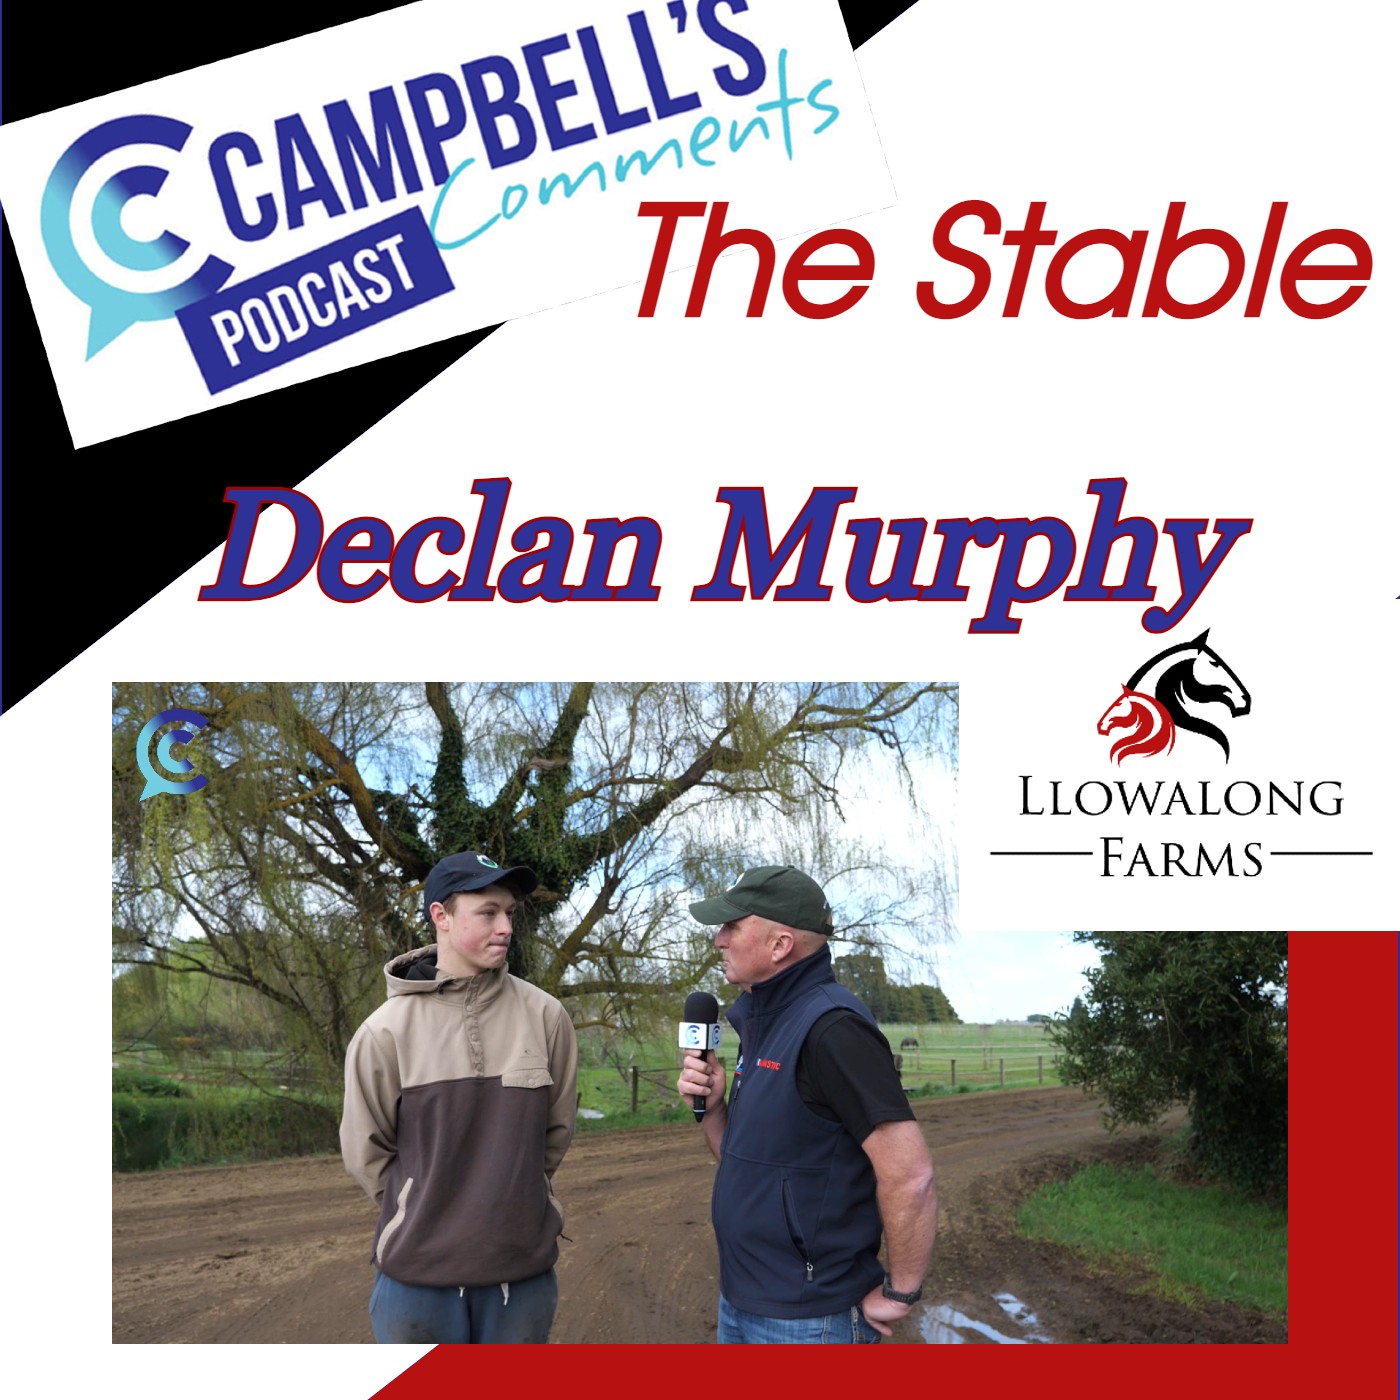 You are currently viewing 206: Campbells Comments The Stable with Declan Murphy